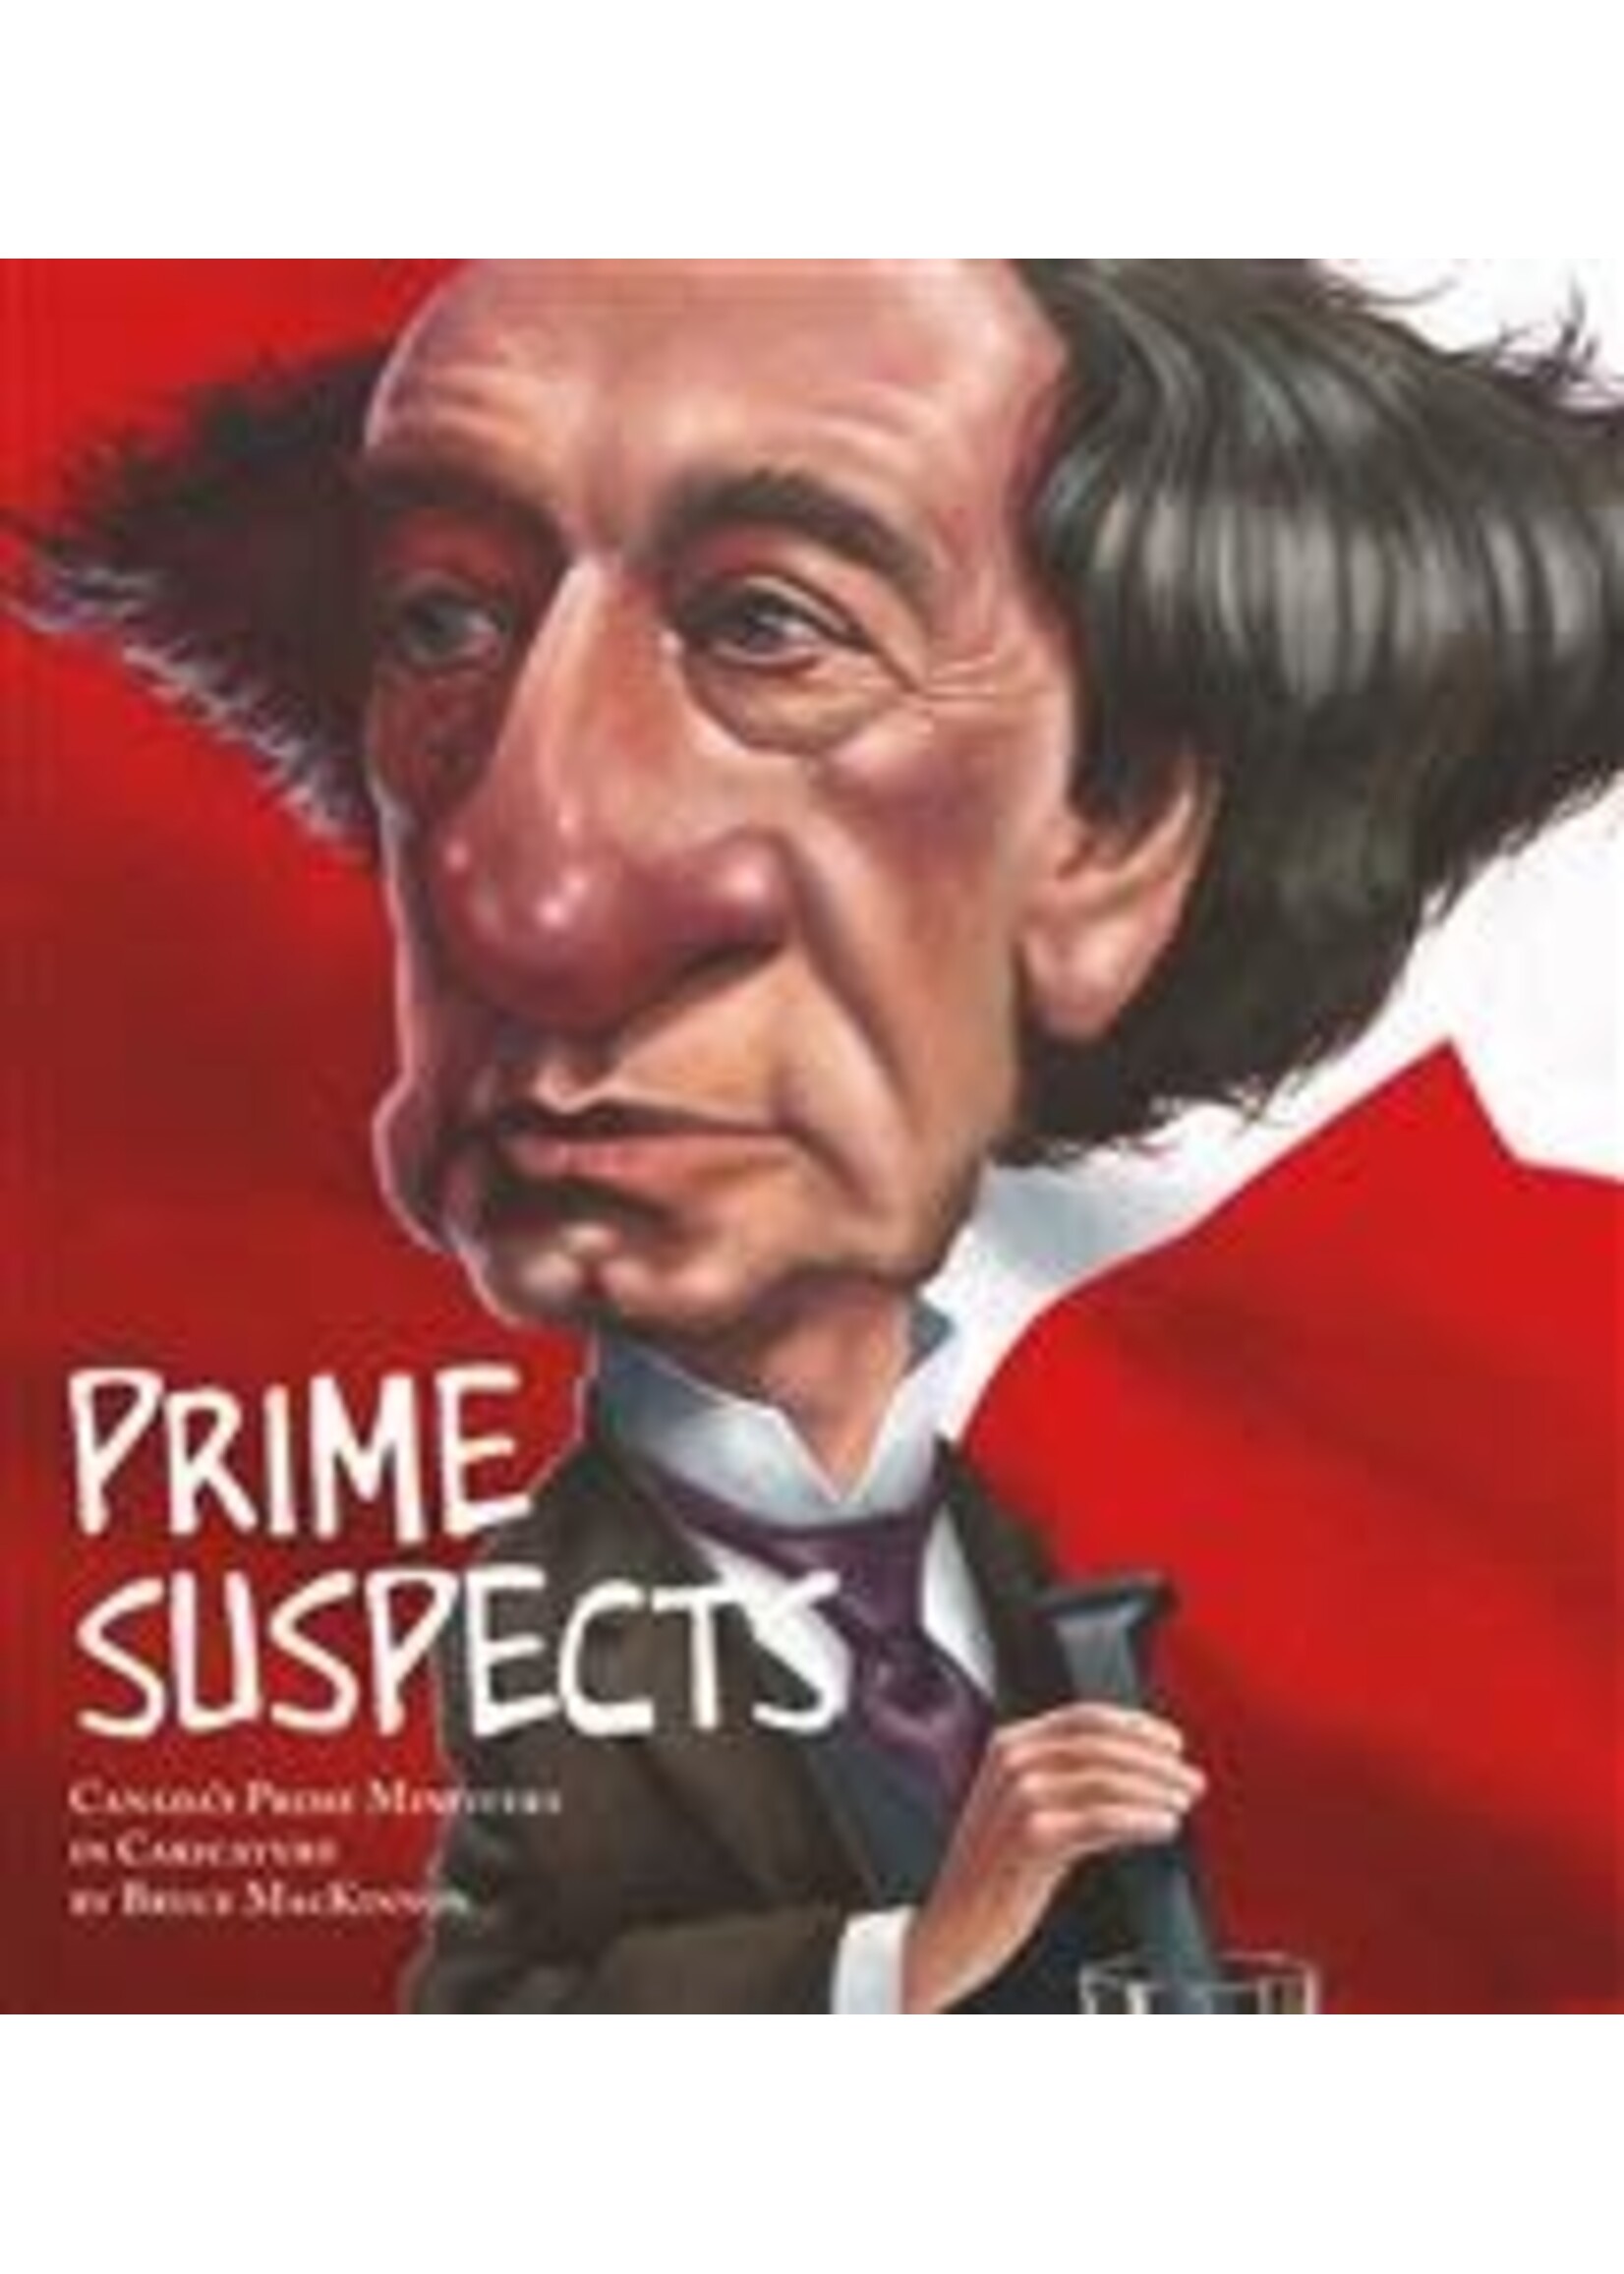 Prime Suspects: Canada's Prime Ministers in Caricature by Bruce MacKinnon